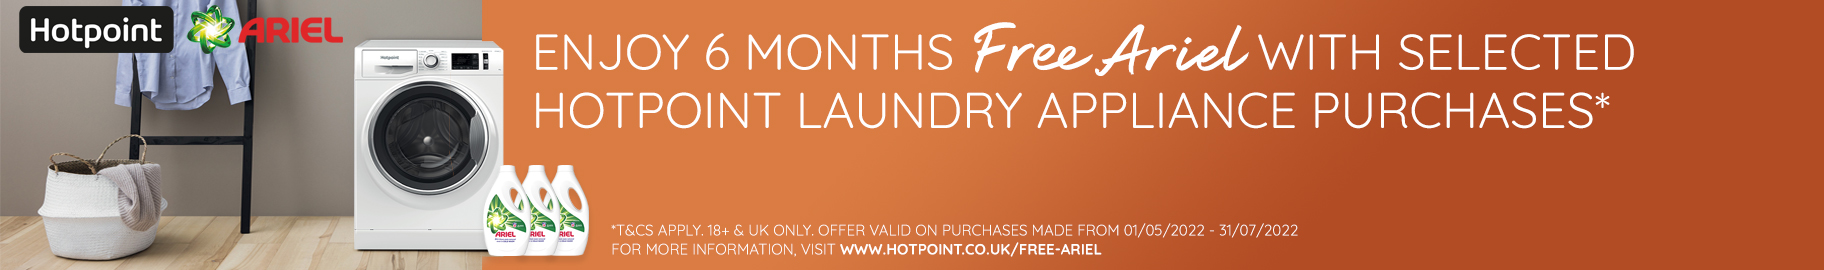 Hotpoint Free Aerial Promotion